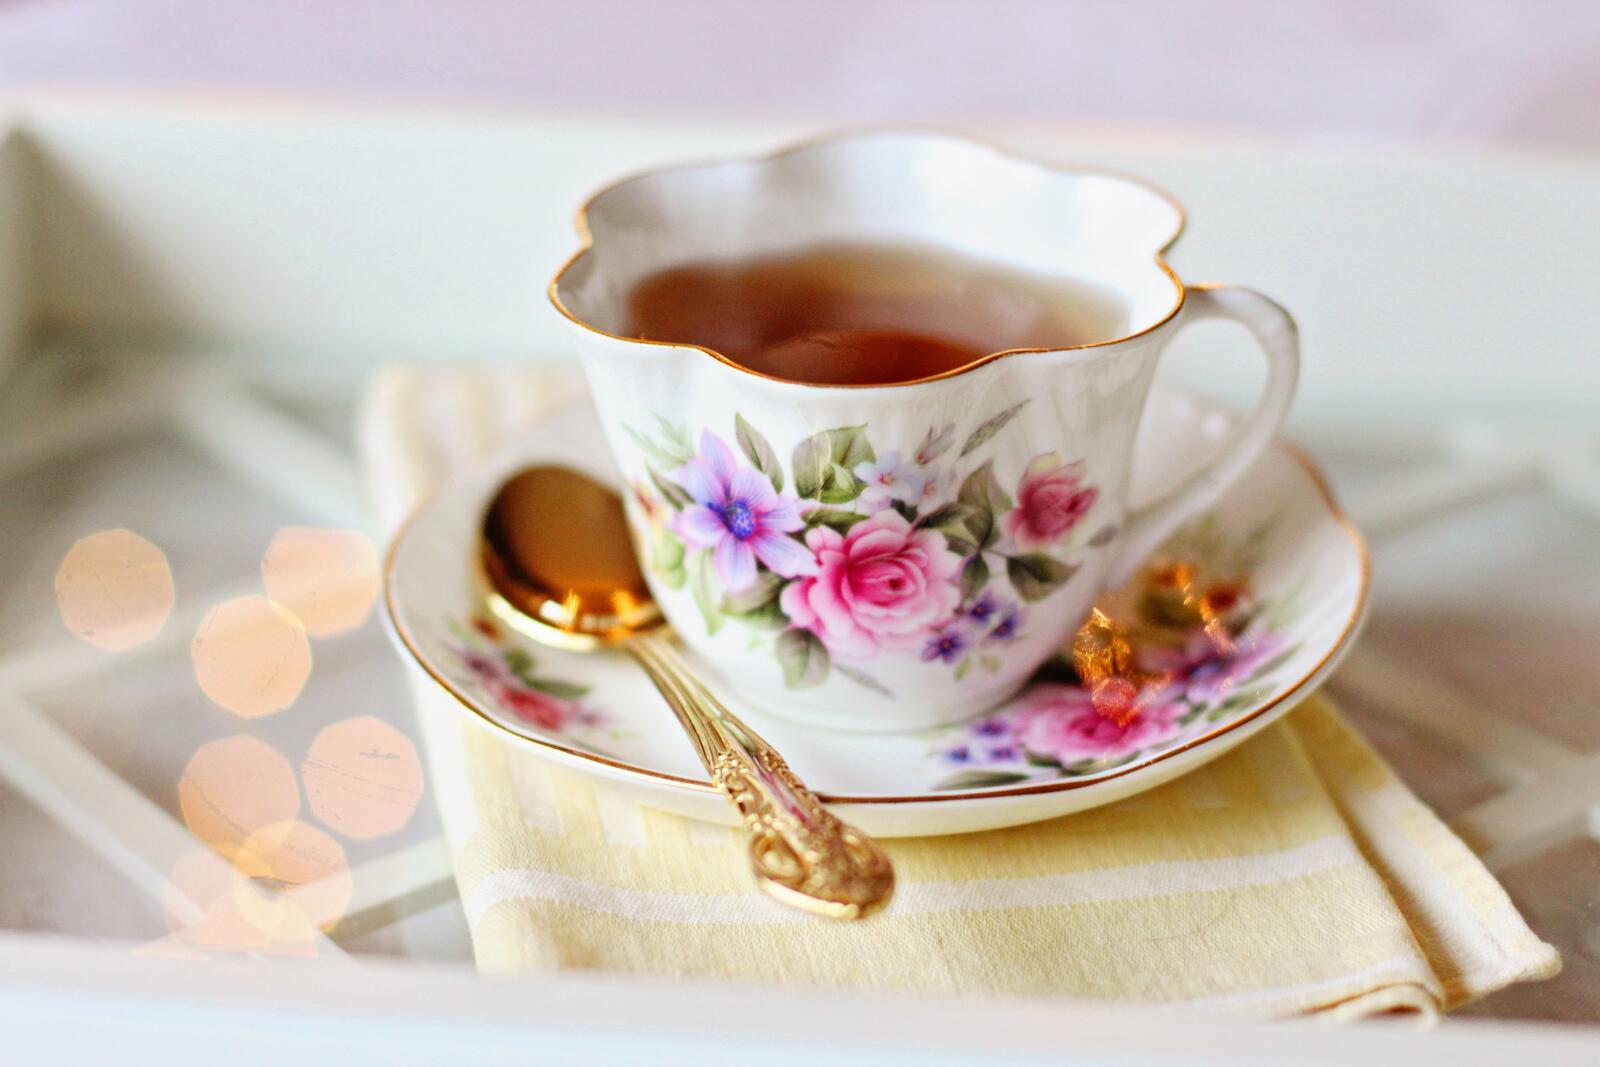 Free photo A cup of tea on a saucer with a golden spoon